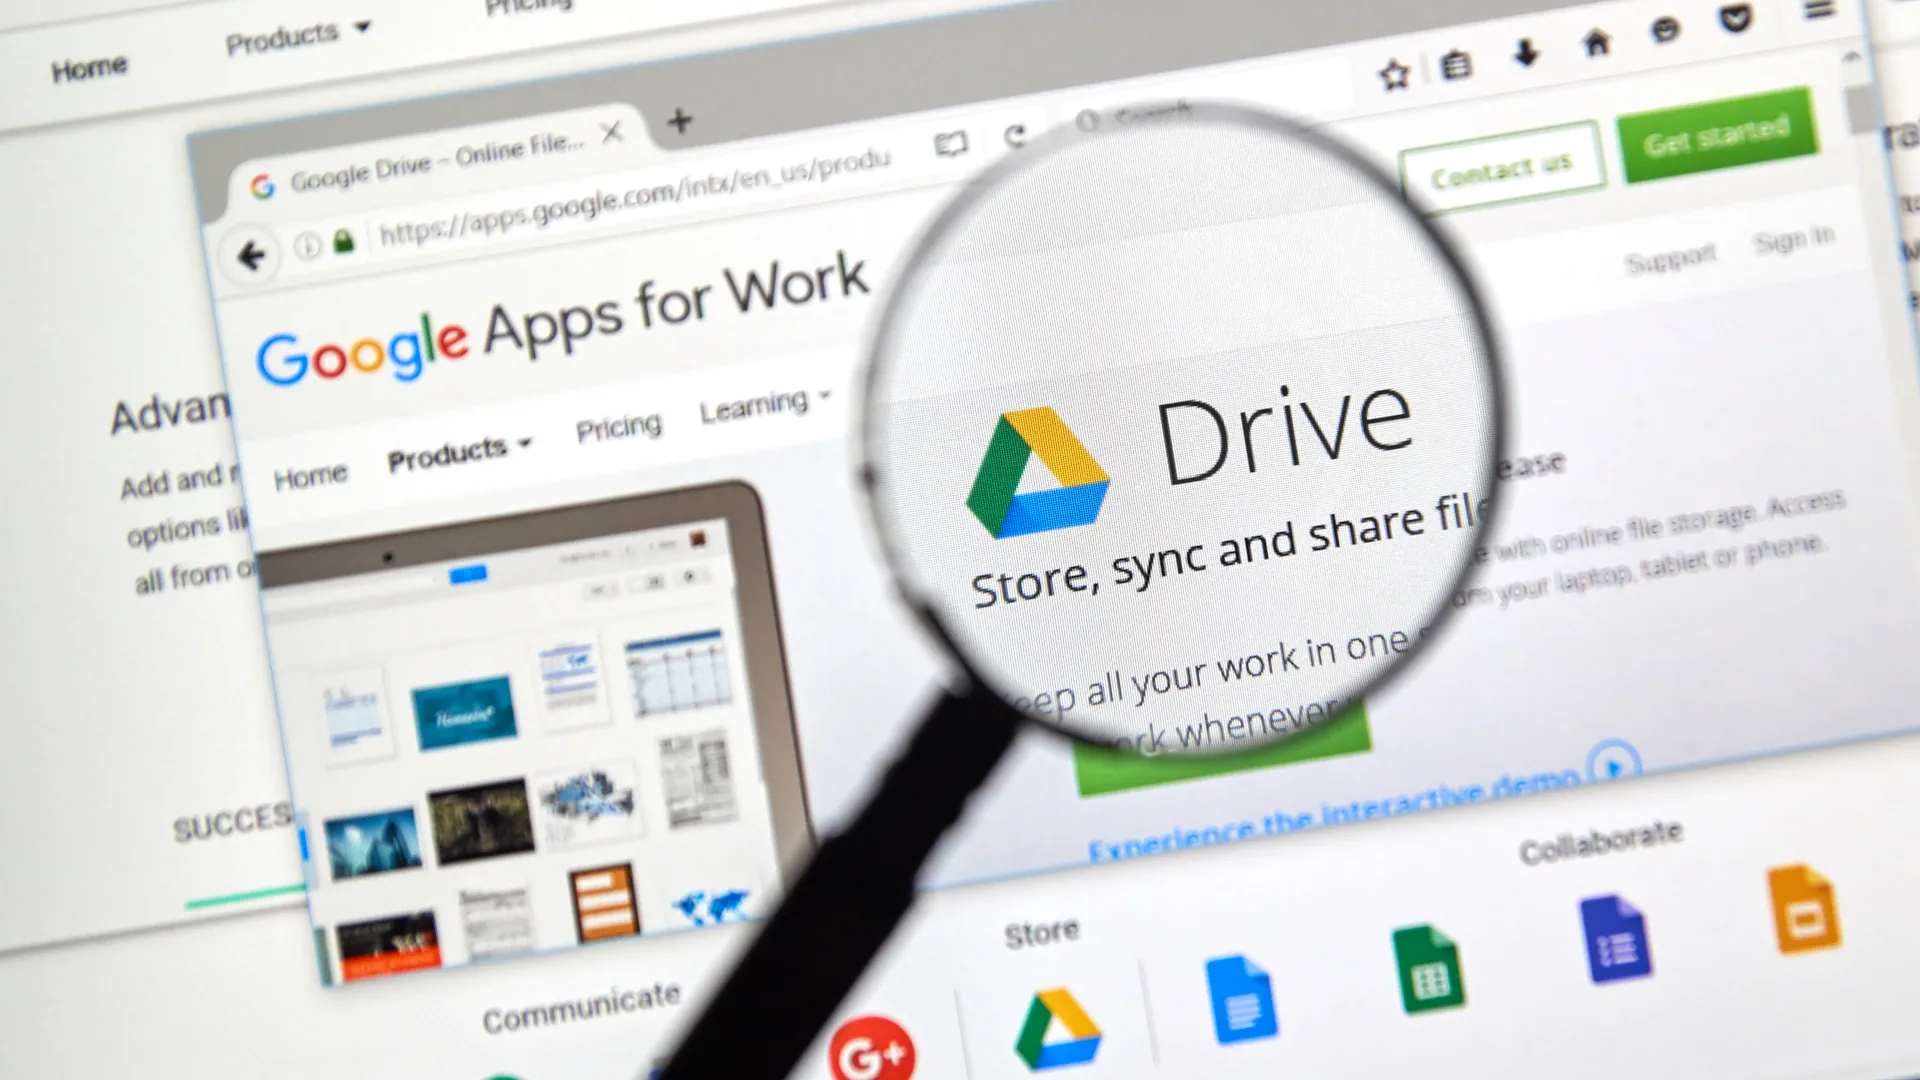 Google is investigating an issue with the Drive service that is causing files to disappear